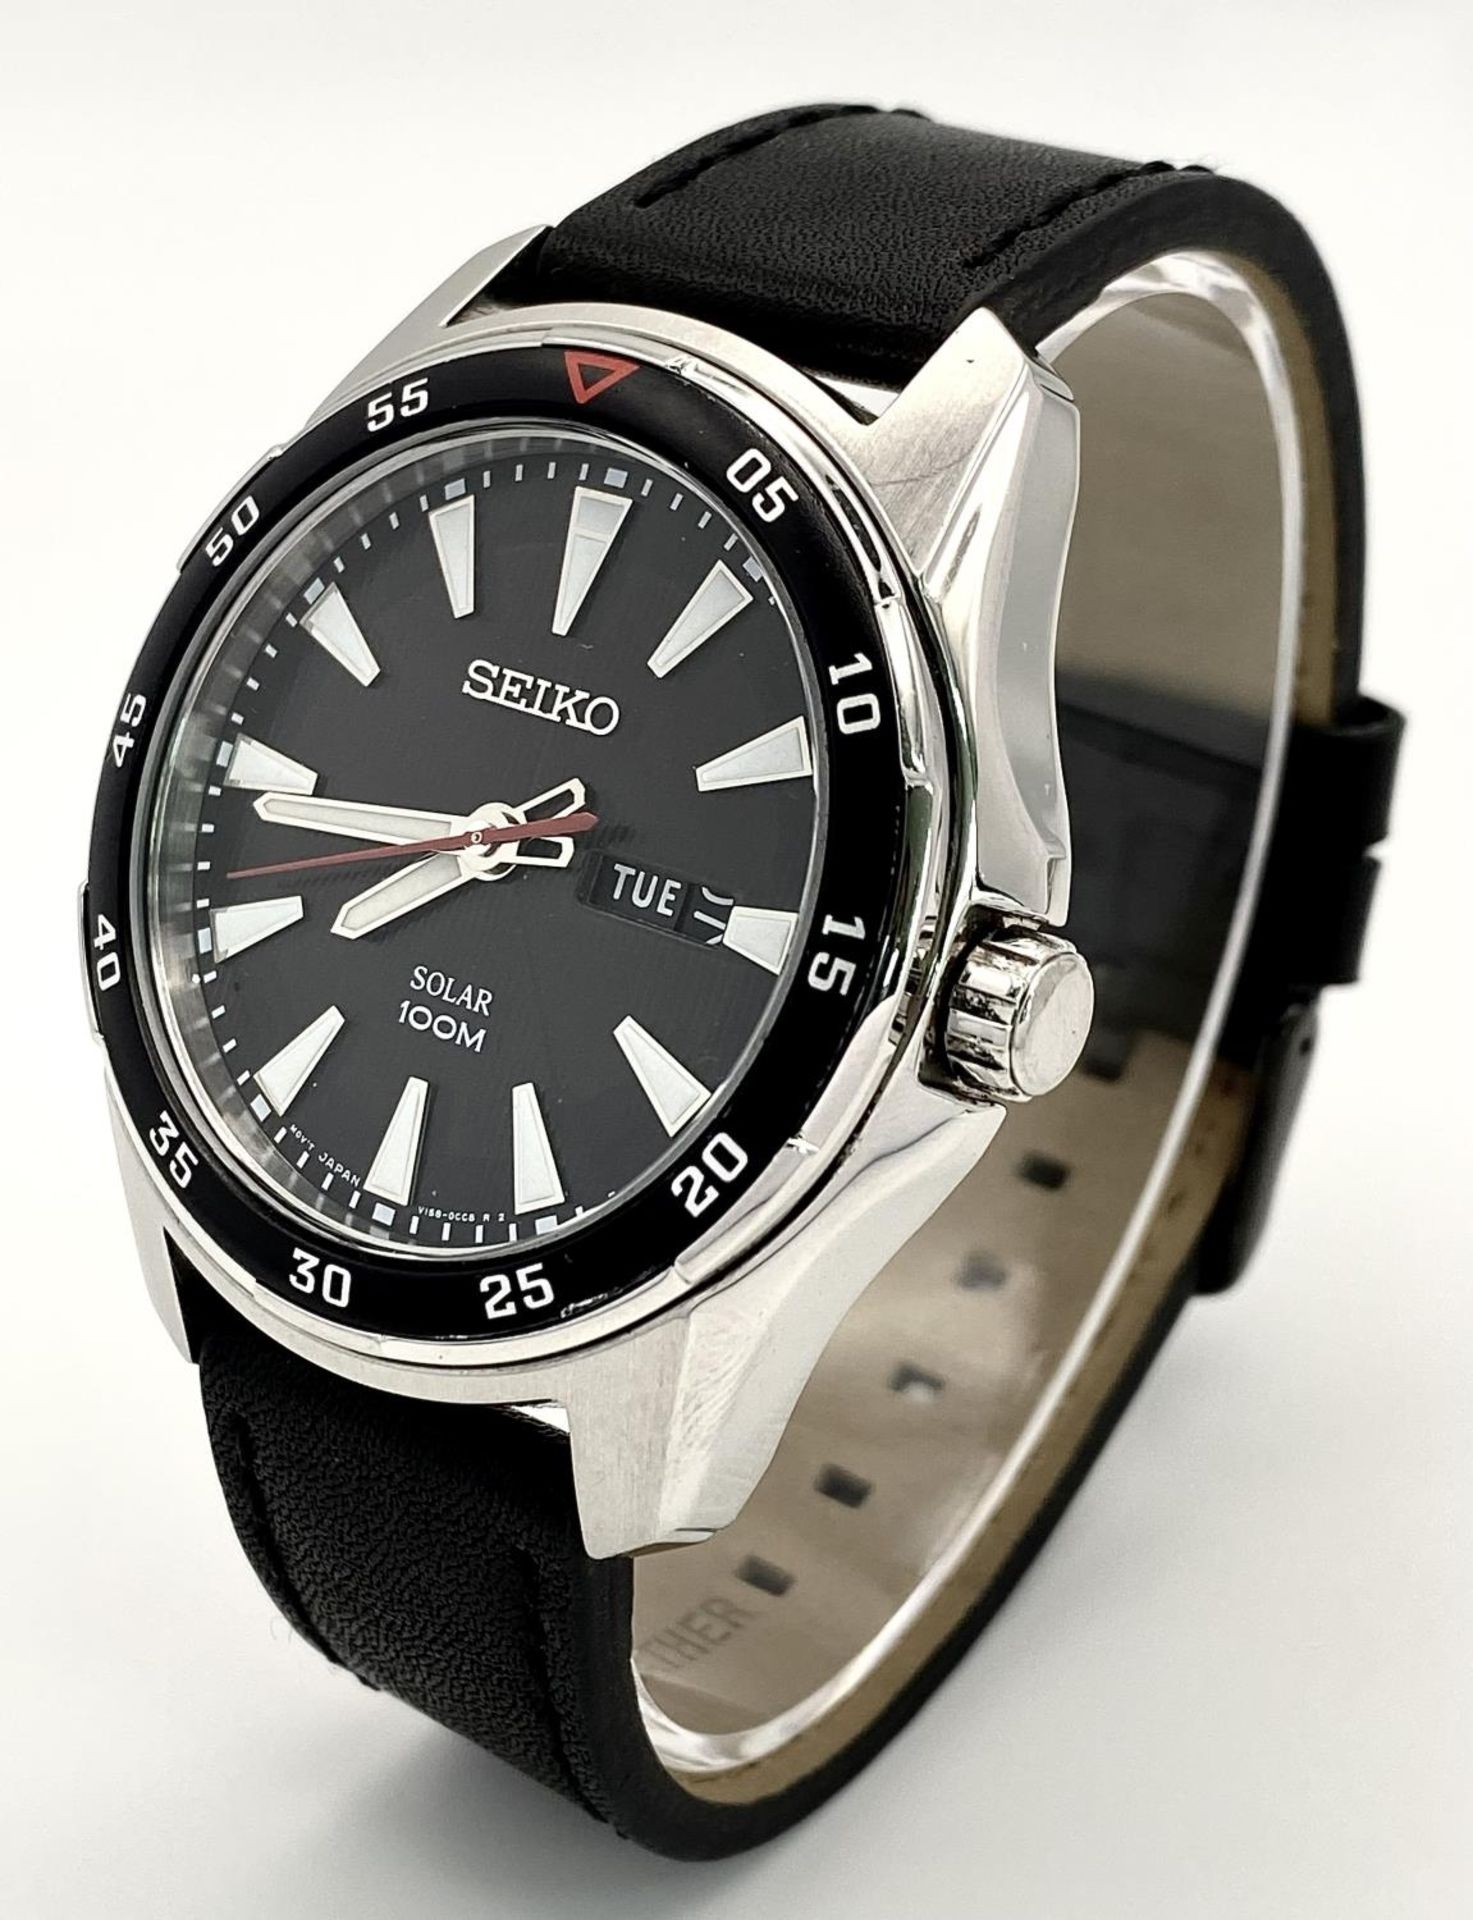 A Seiko Solar Gents Watch. Black leather strap. Stainless steel case - 44mm. Black dial with day/